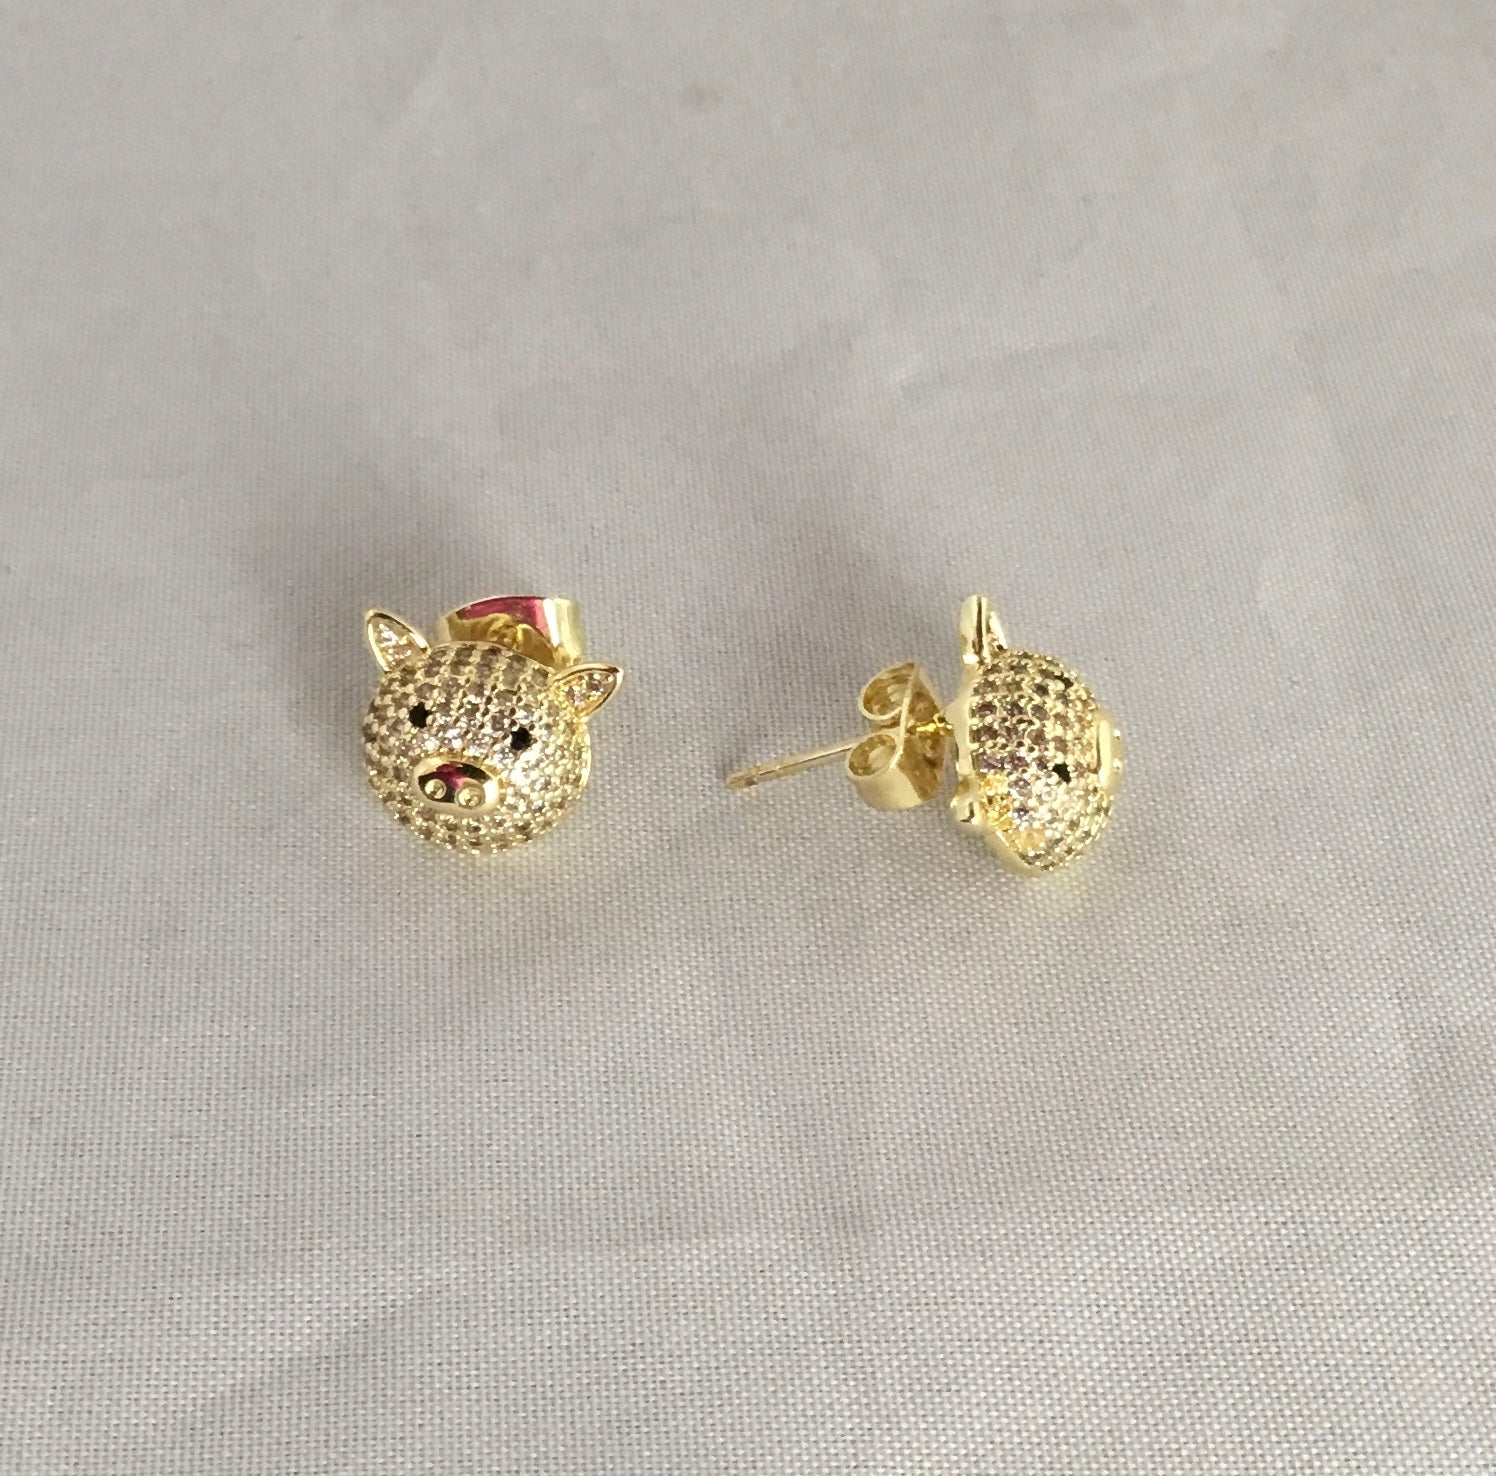 Gold Filled Pig Stud Earring with micro zircon